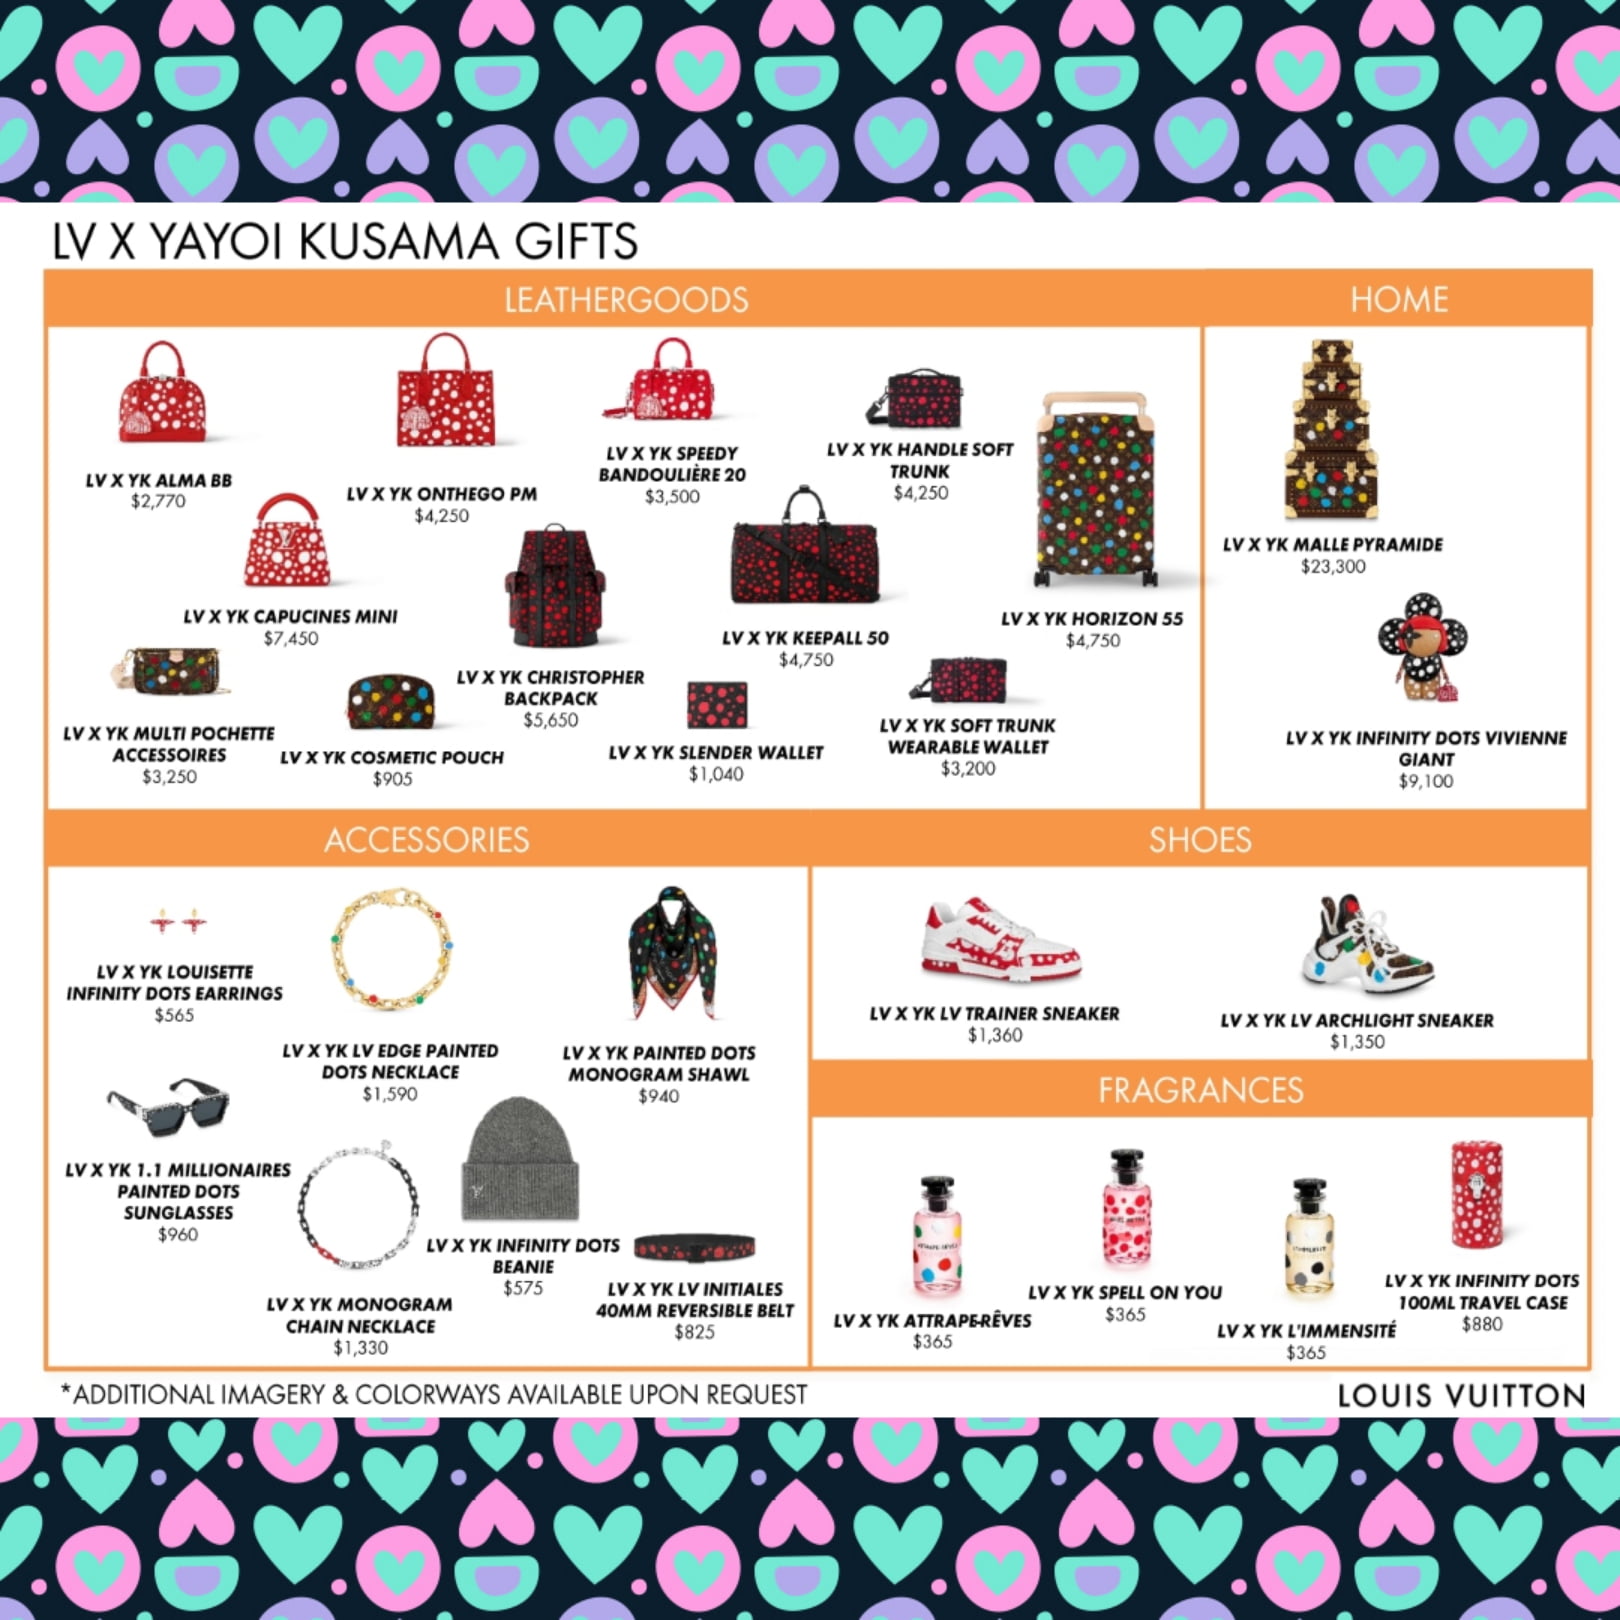 Louis Vuitton gift guide for loved ones and Valentine’s Day via 360 MAGAZINE.